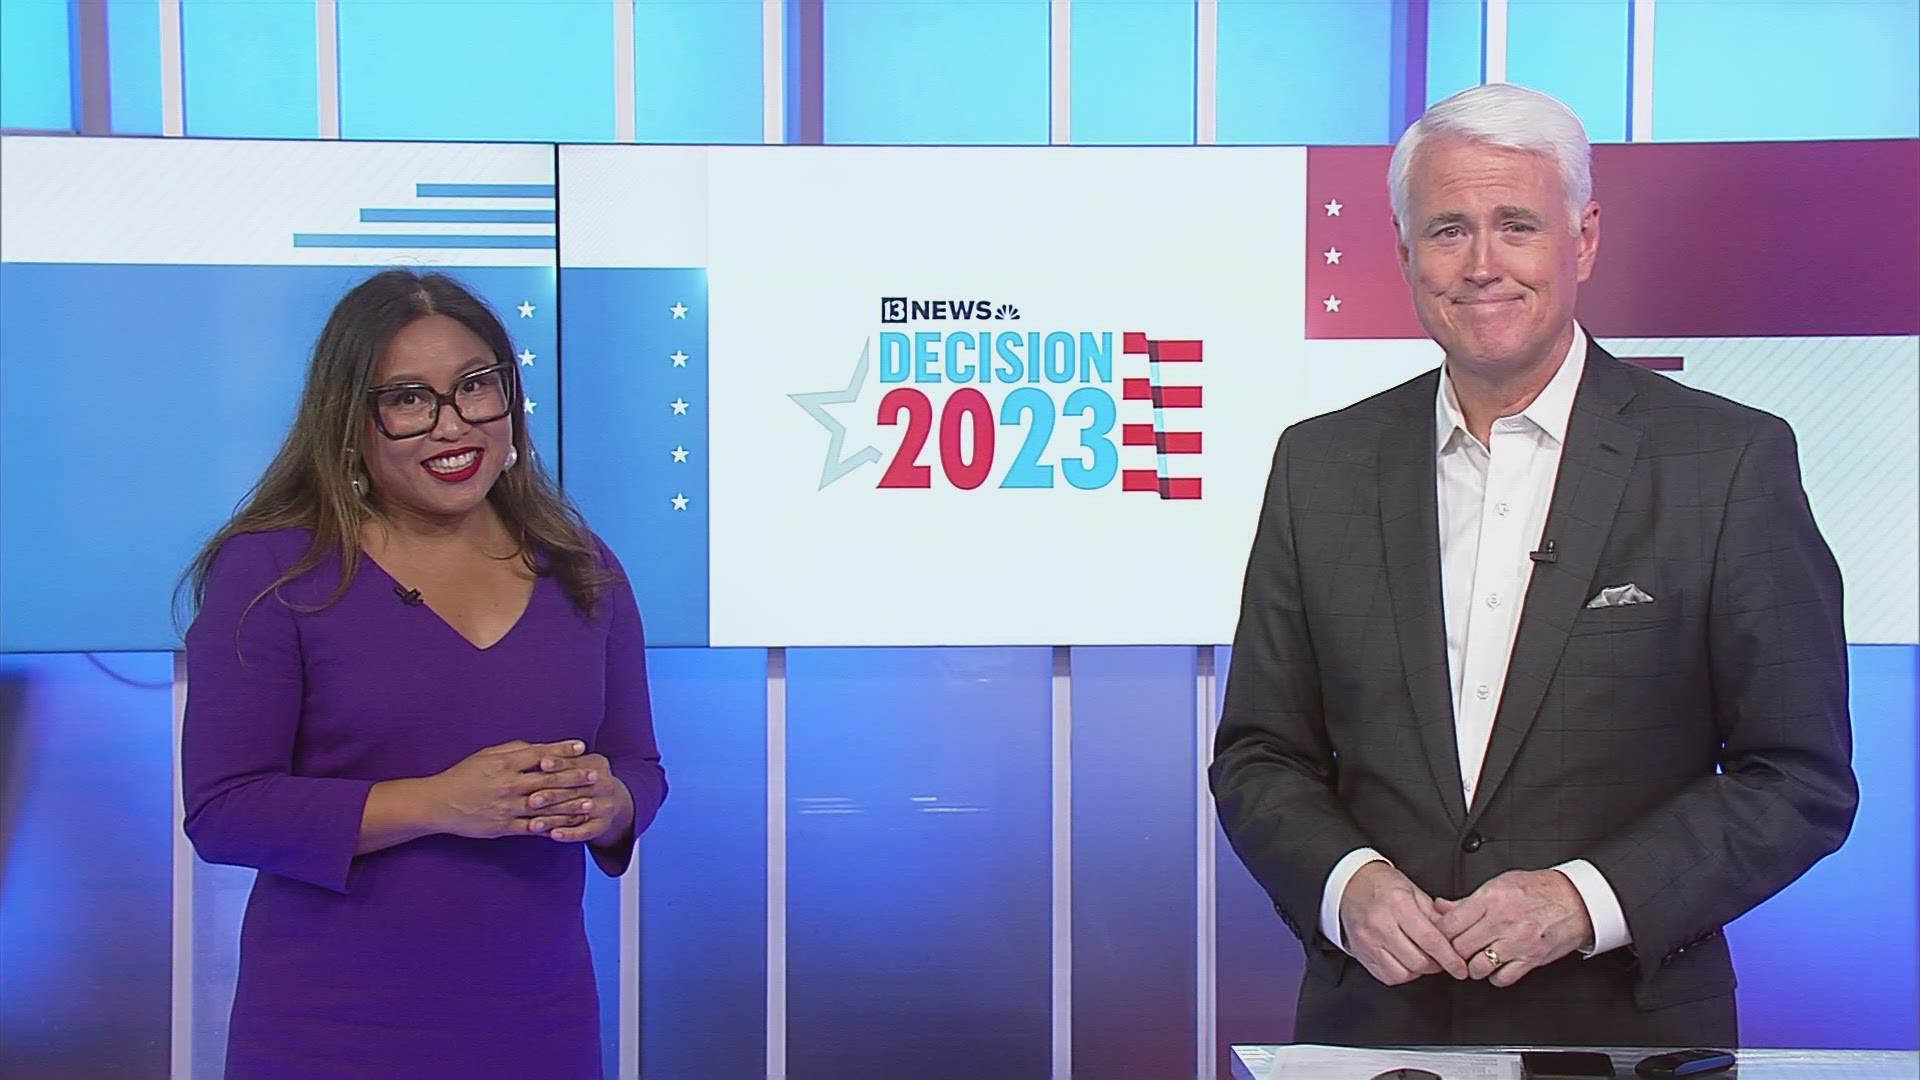 13News political expert Melissa Borja breaks down the results of the Indiana elections of 2023.